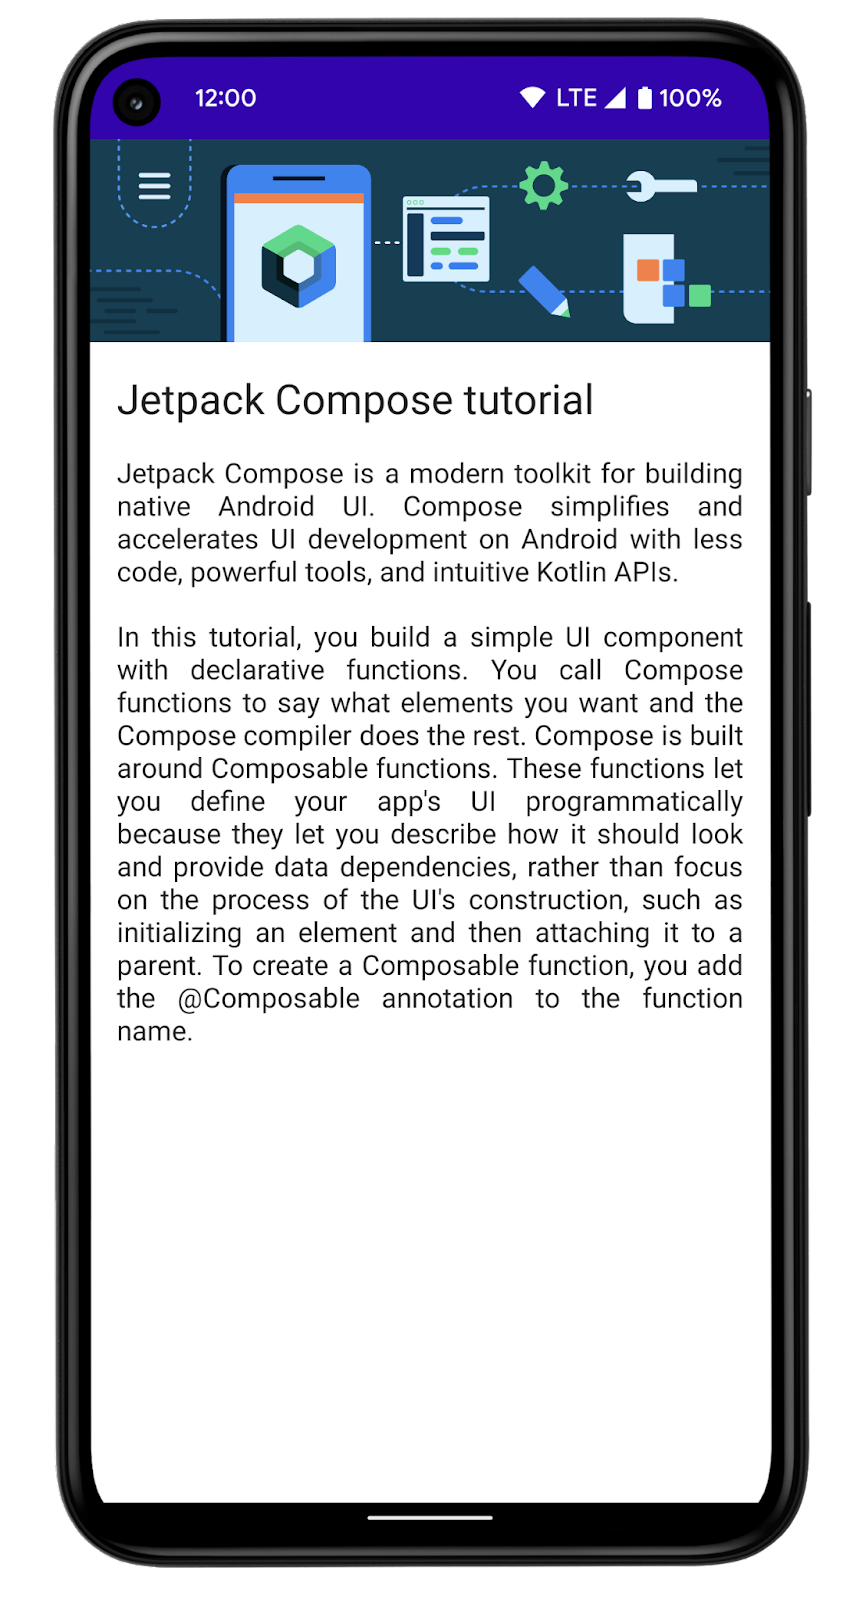 The app displays a tutorial for Compose.